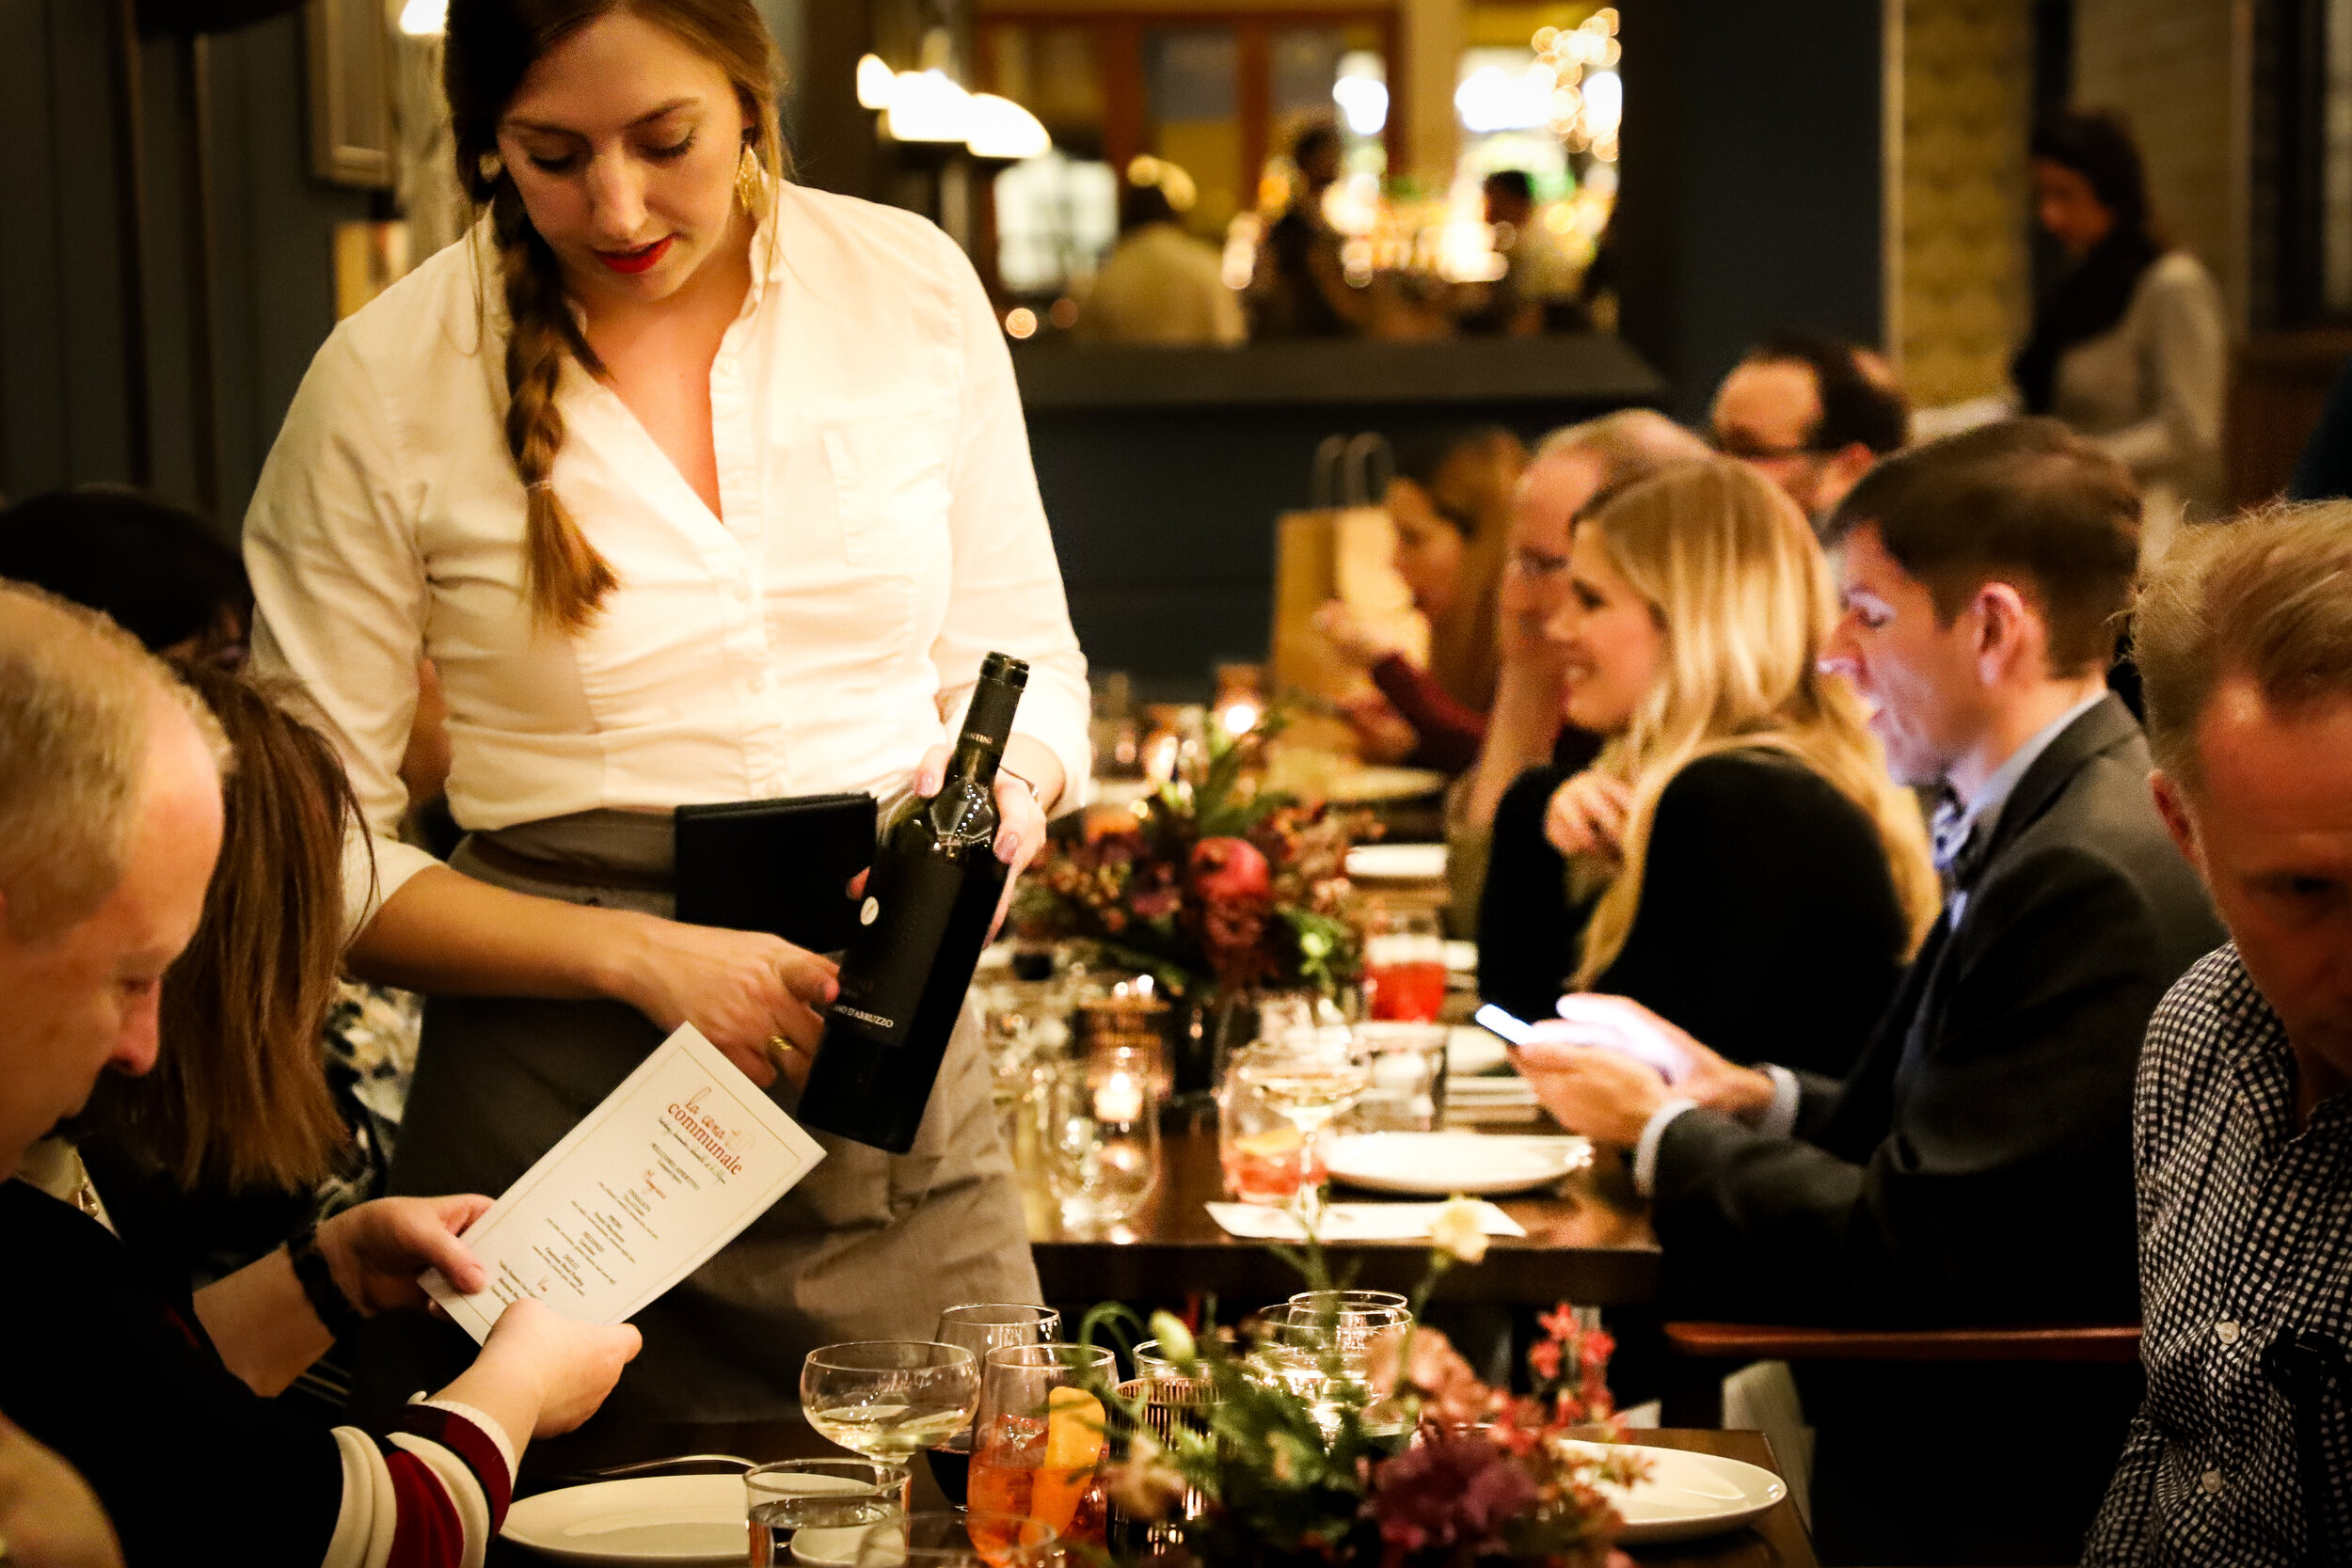 Capture the moment: A server assisting a guest in selecting a wine, presenting the bottle for consideration.